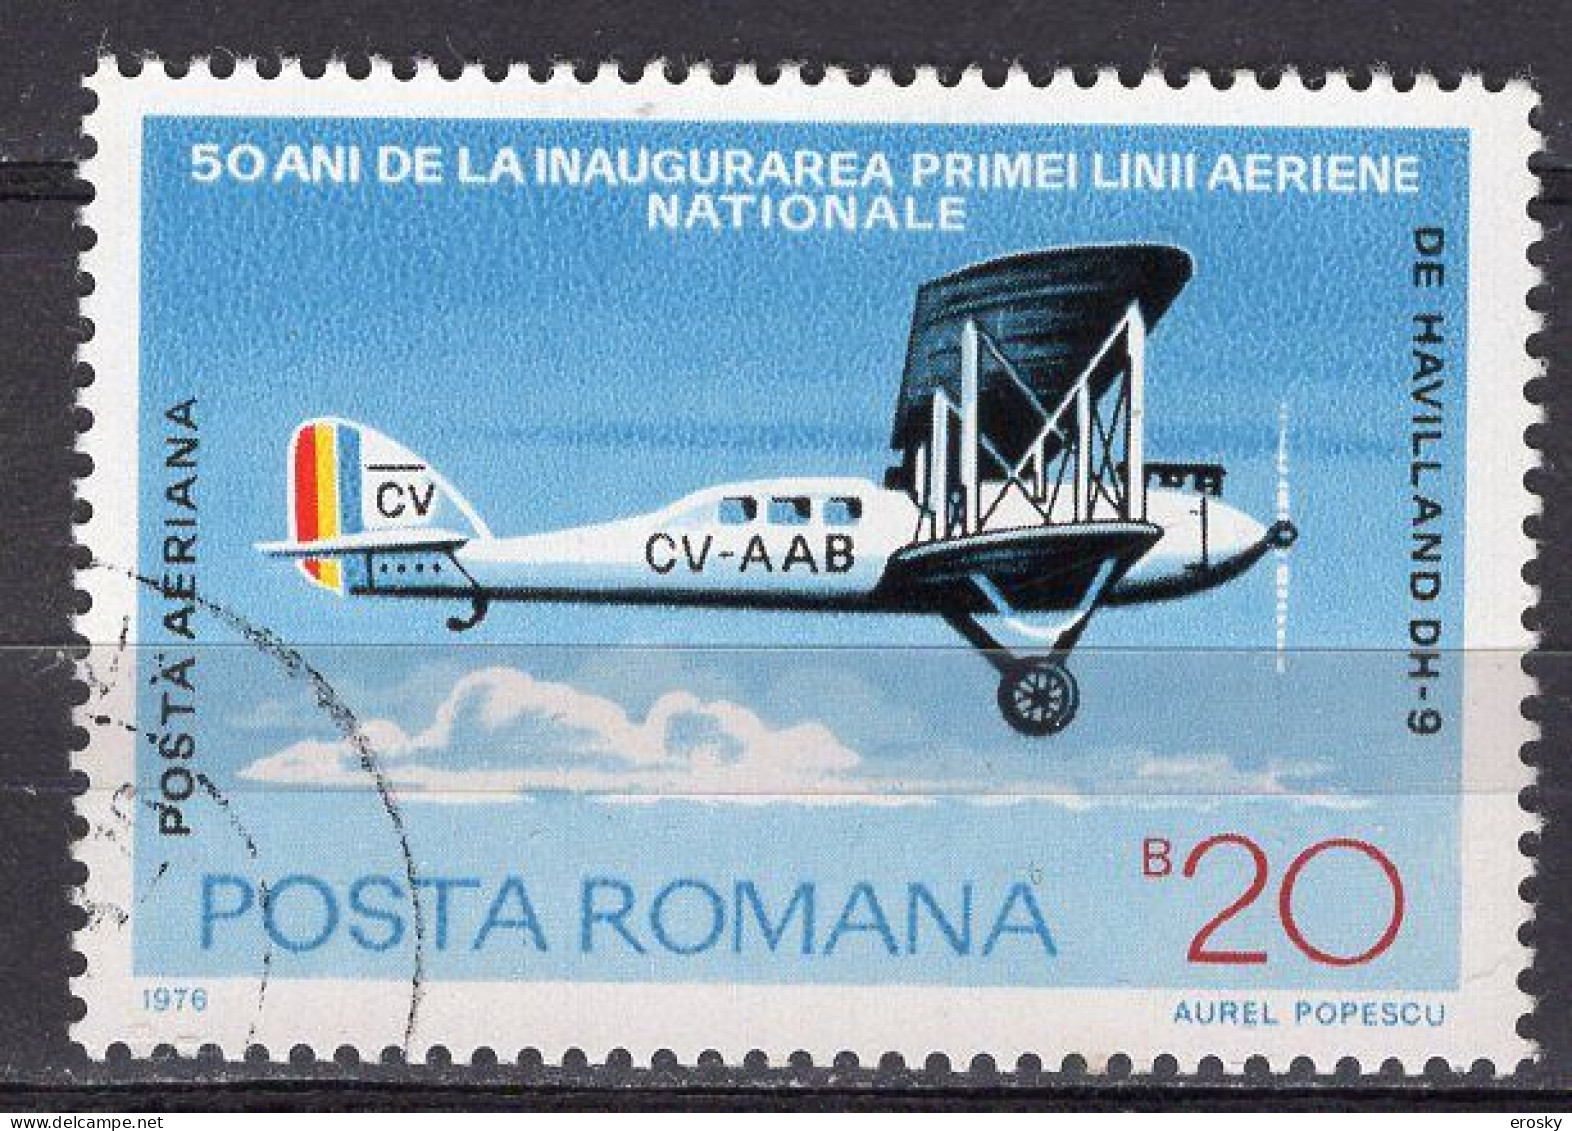 S2755 - ROMANIA ROUMANIE AERIENNE Yv N°239 - Used Stamps